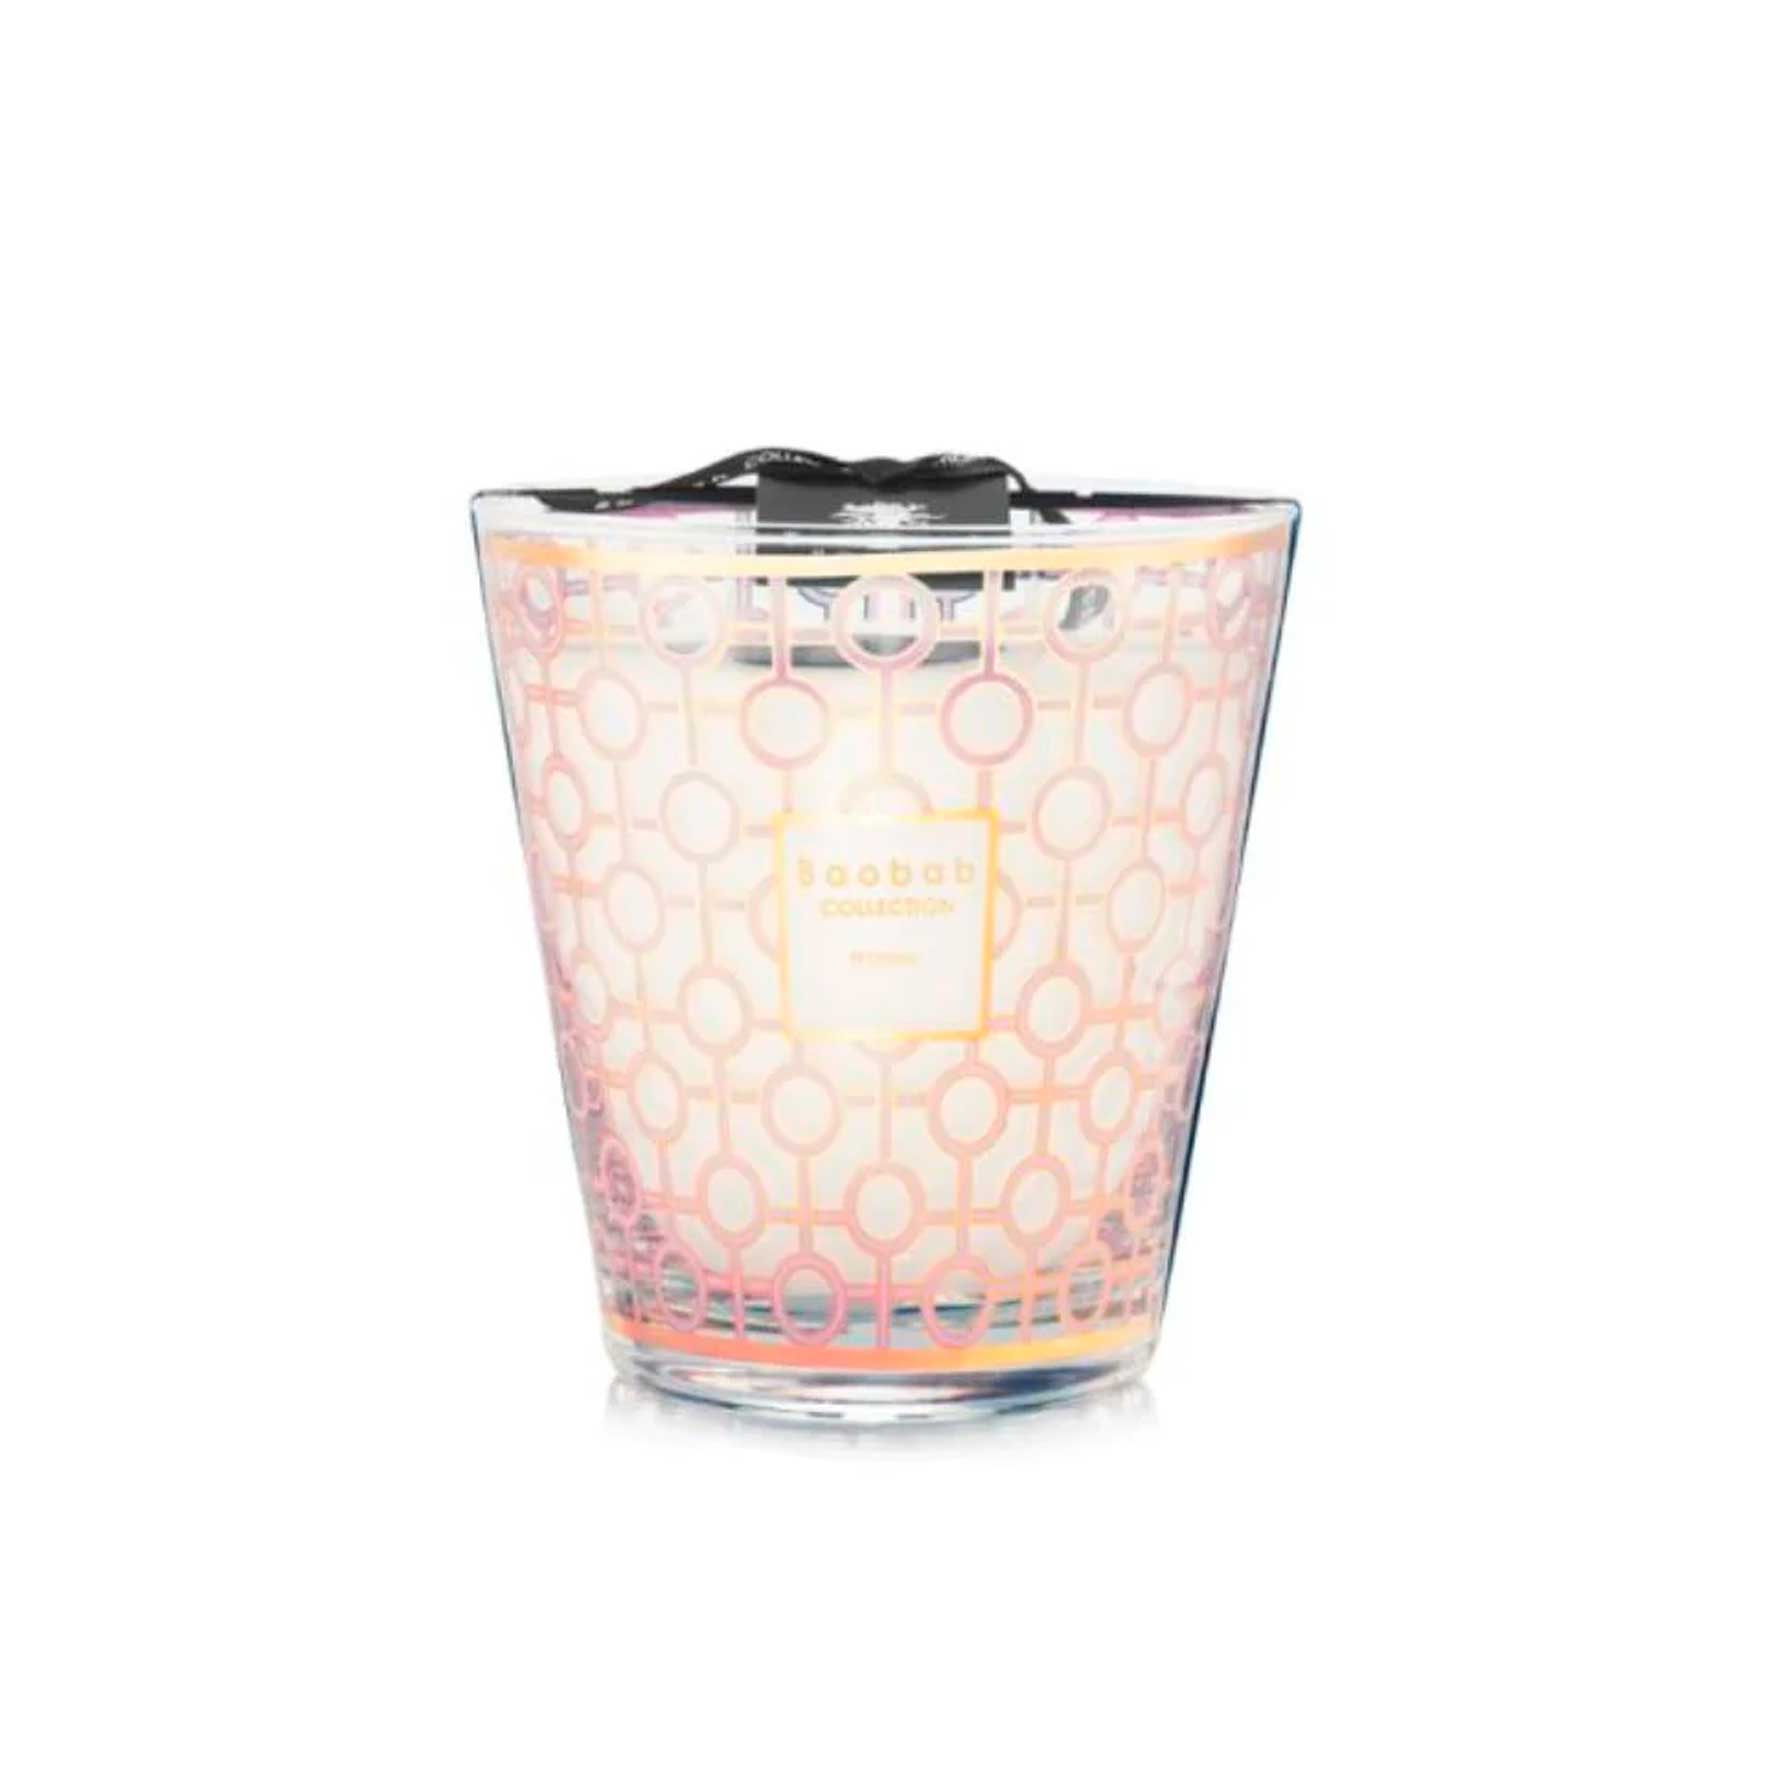 Baobab Collection Woman Scented Candle | Barker & Stonehouse